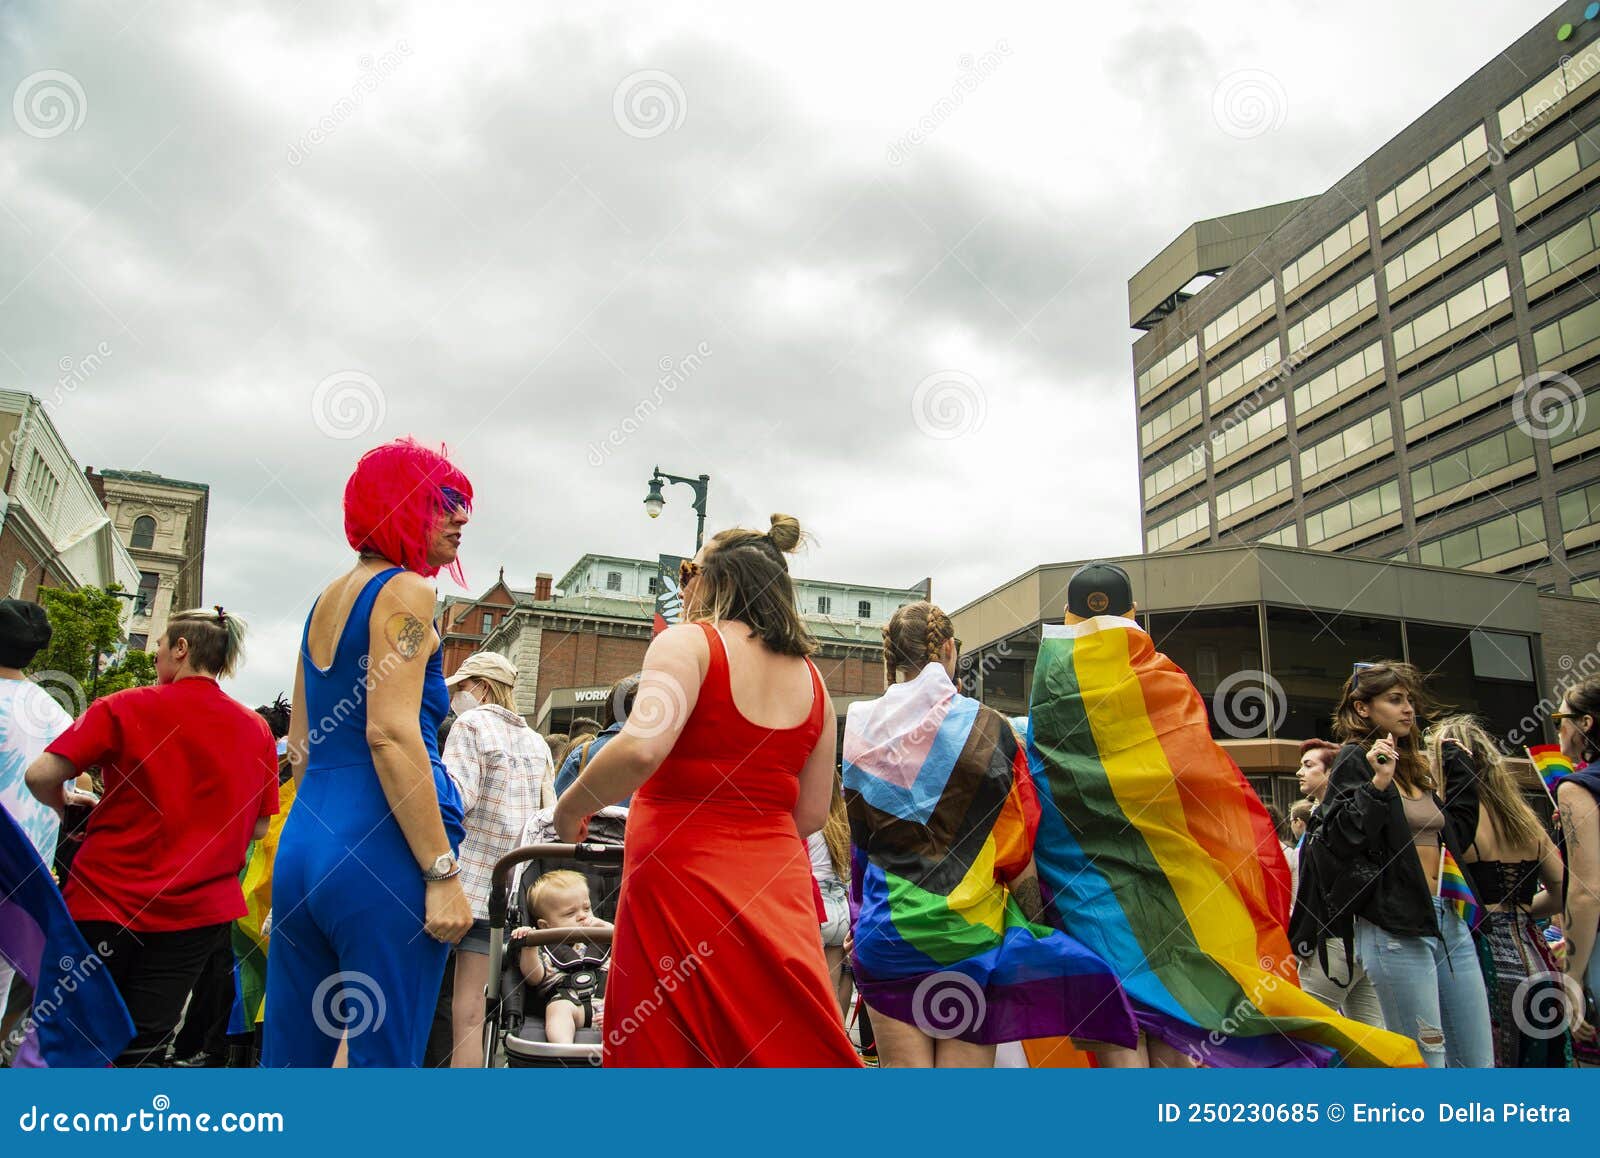 2015 Made History for LGBT Rights. Why 2016 Won't Match It. | Time